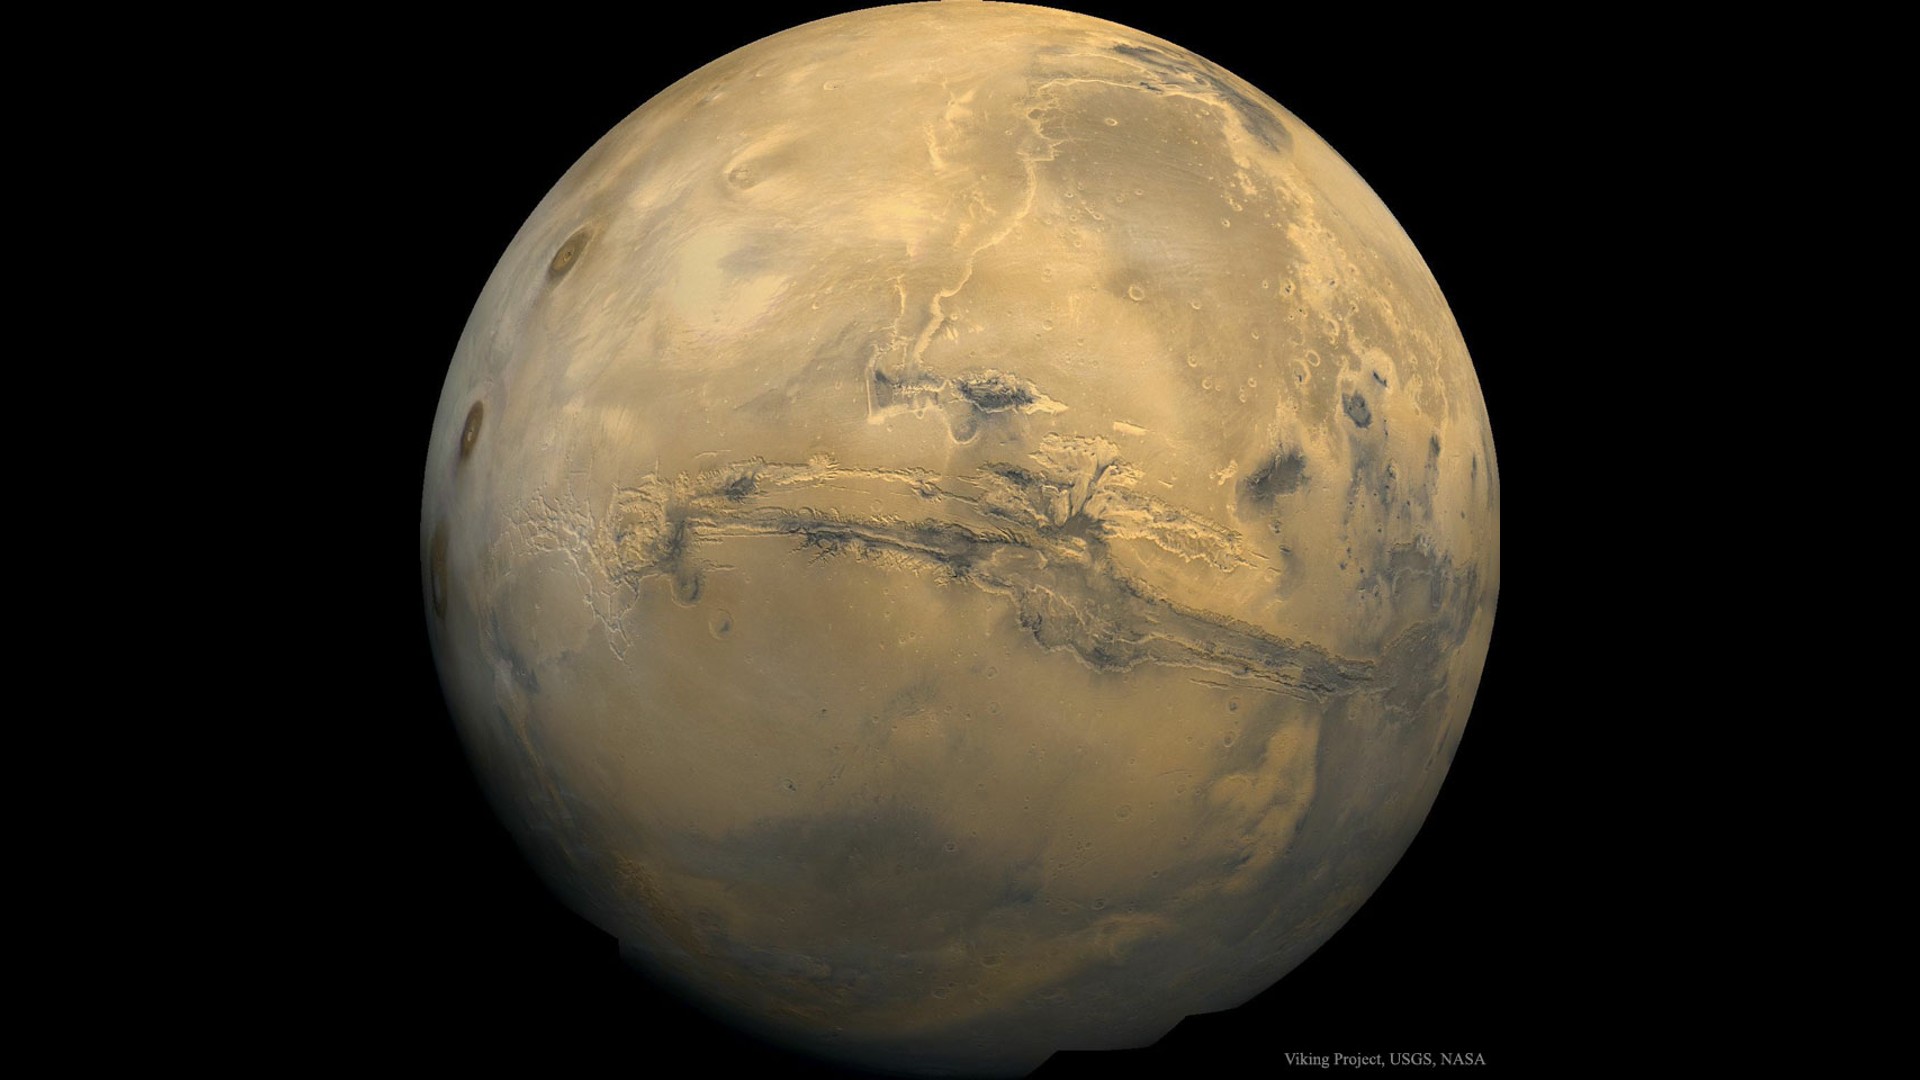 How Can Astronauts Explore Mars Grand Canyon Valles Marineris Space